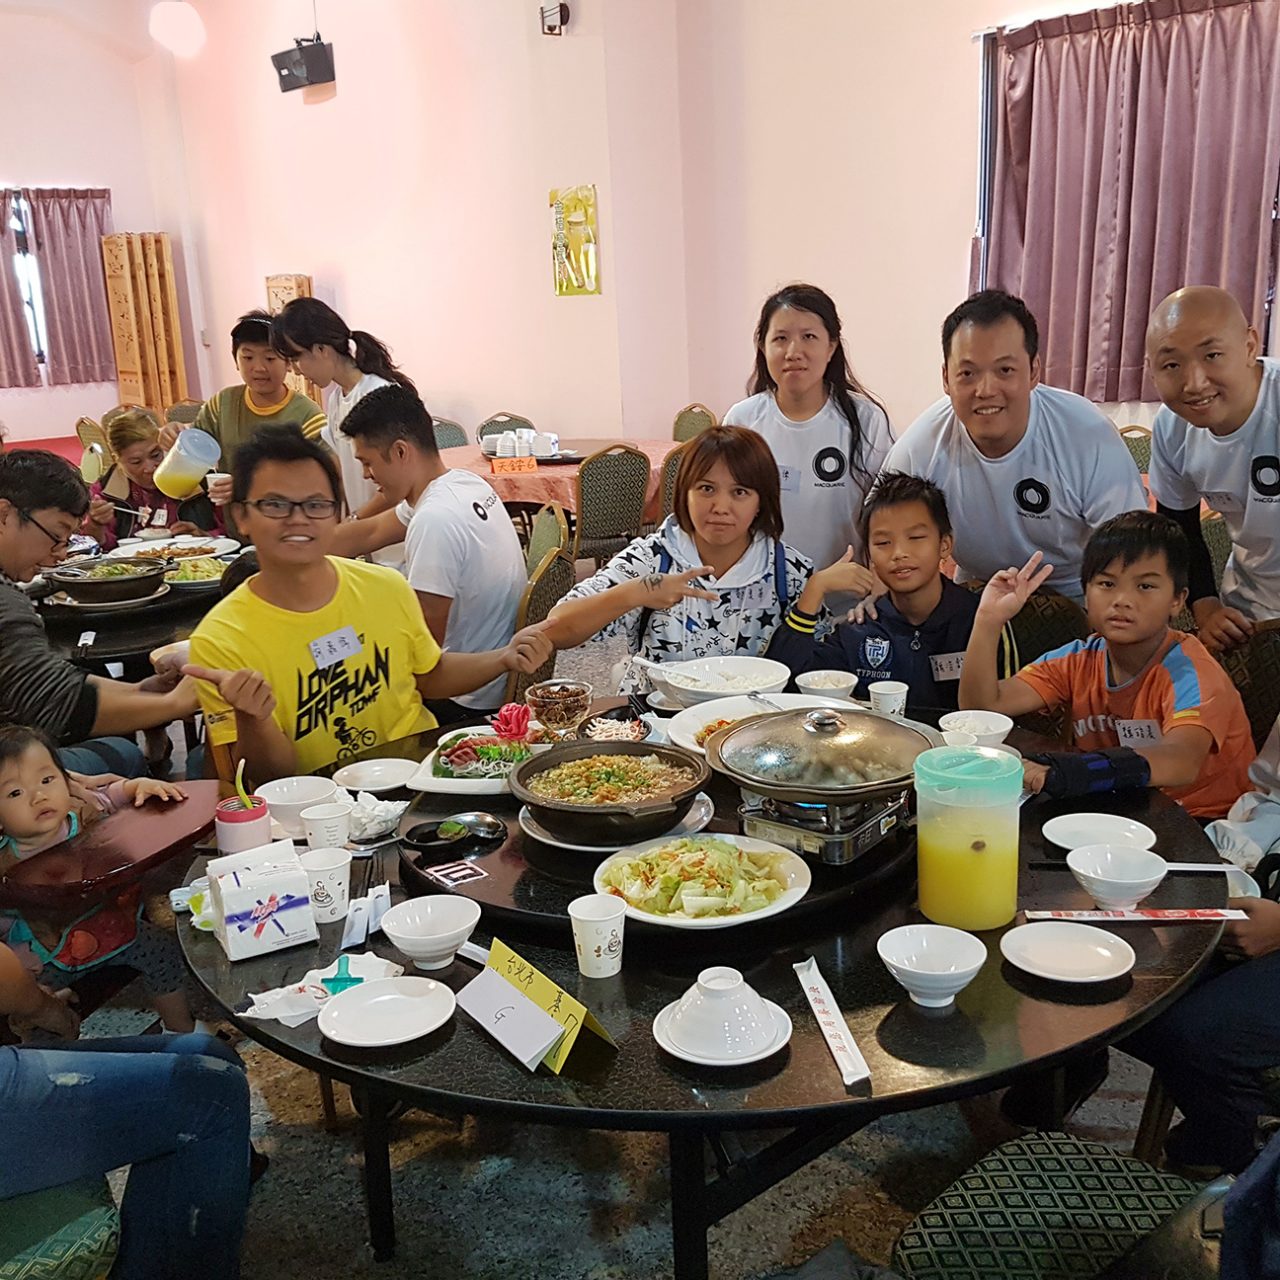 Taipei staff organised events with the local Orphan Welfare Foundation